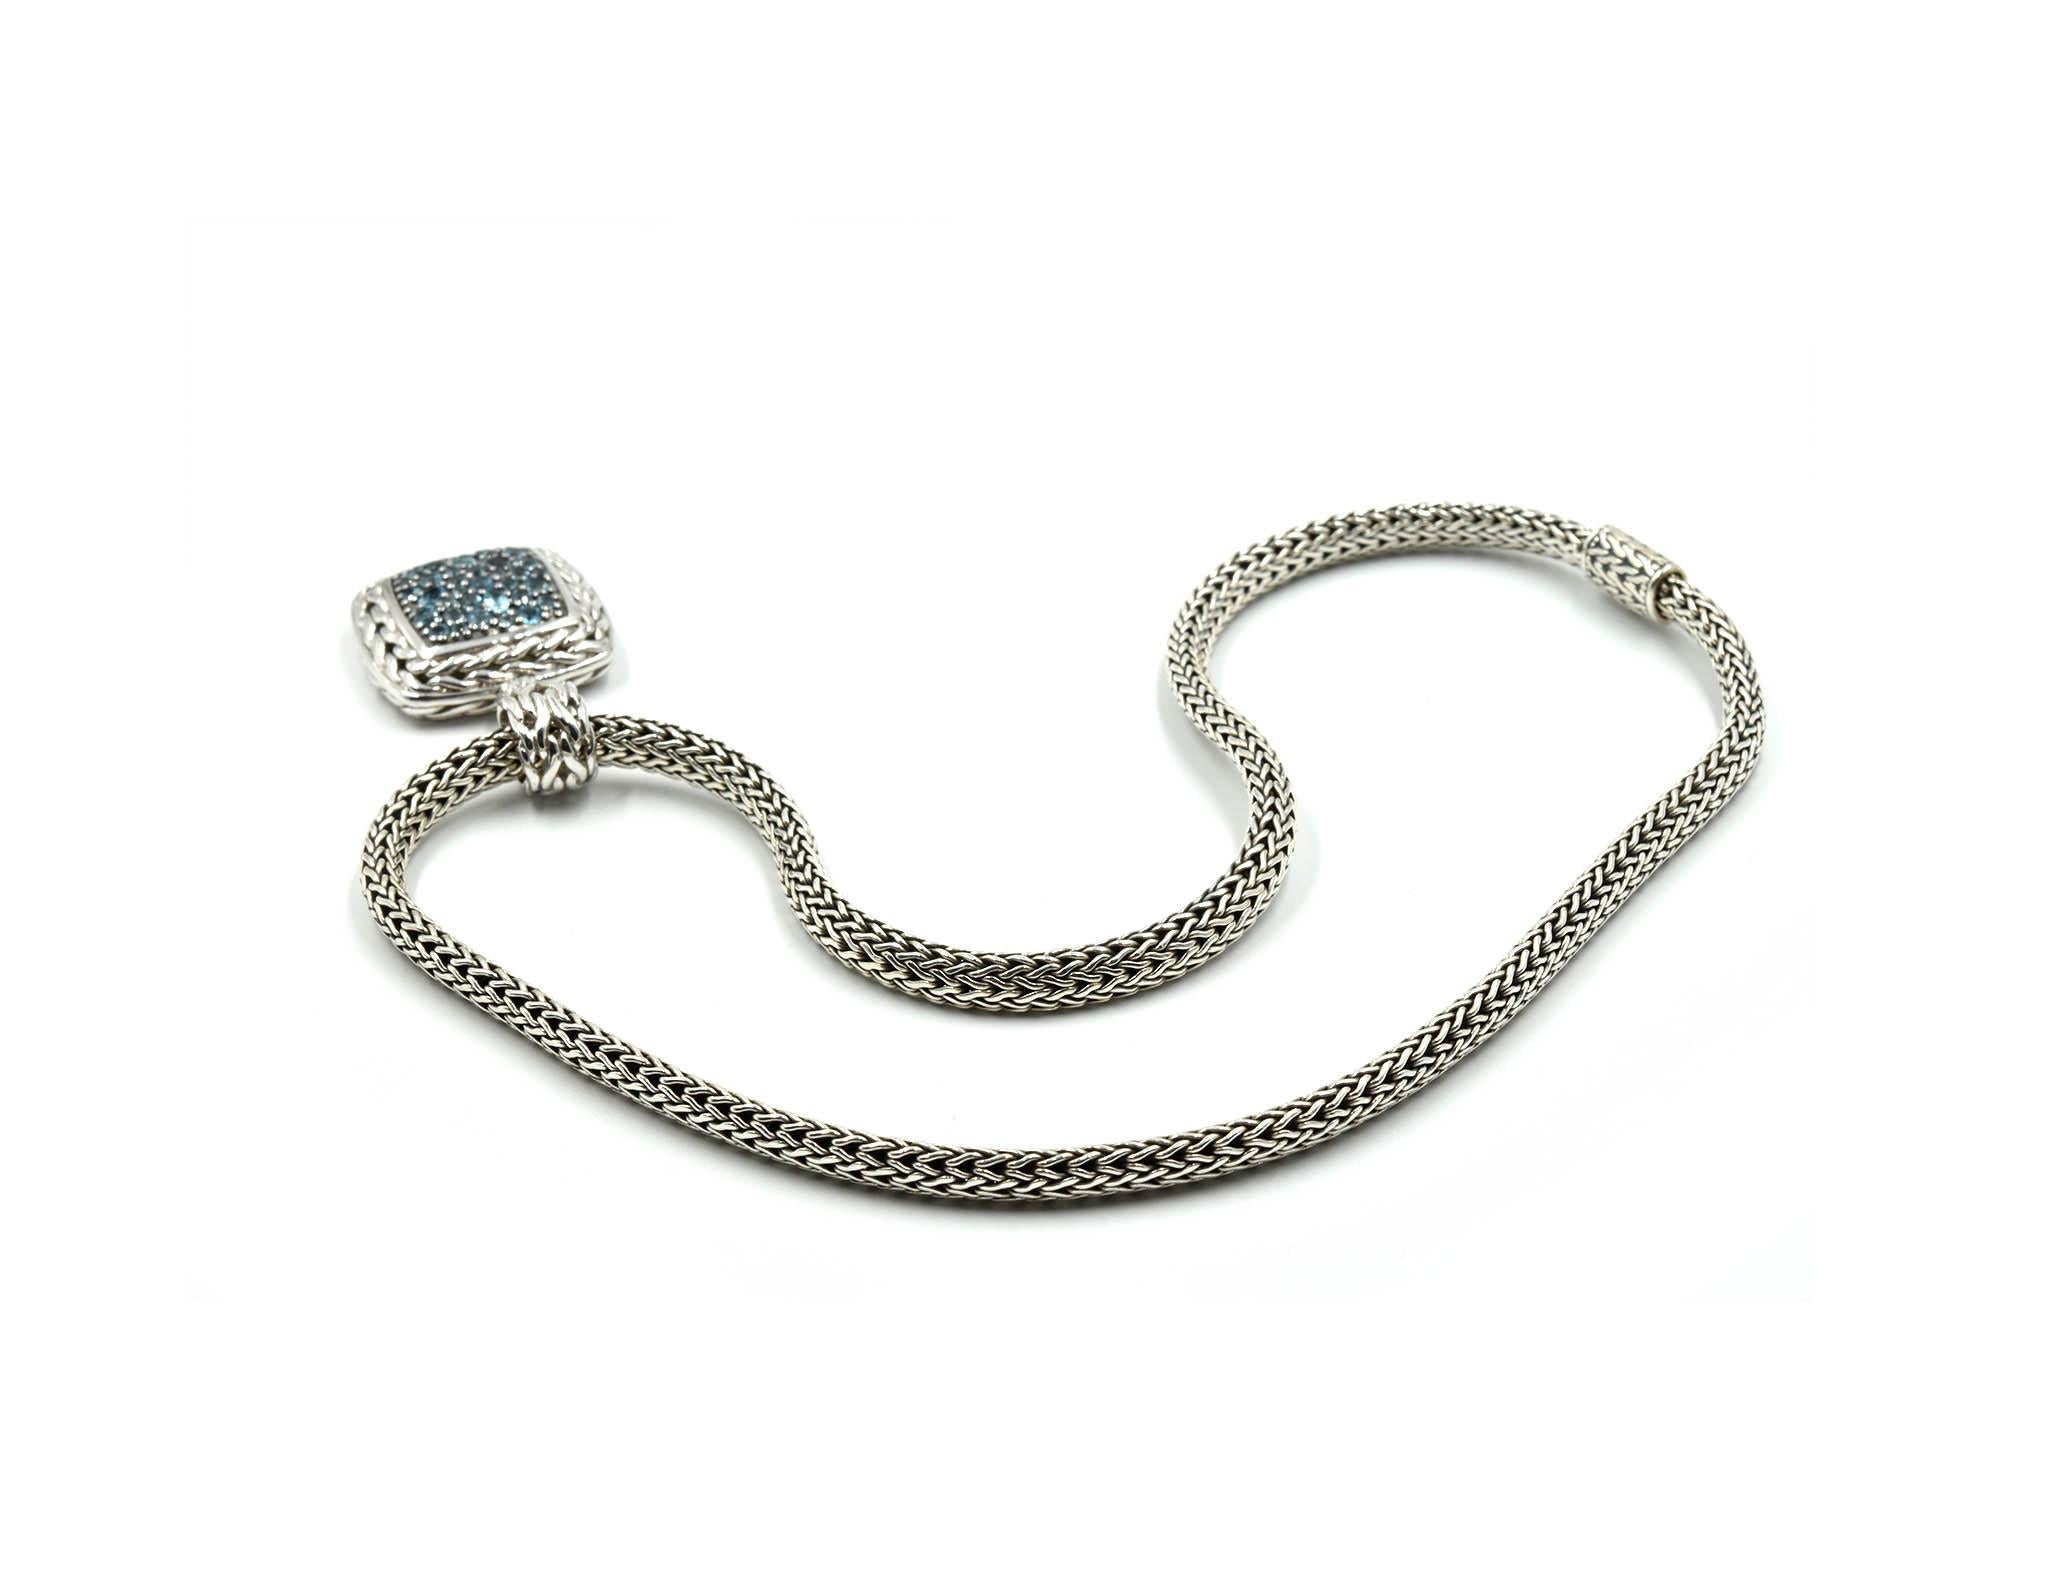 Designer: John Hardy
Collection: Classic Chain Collection
Material: sterling silver
Gemstone: blue topaz
Dimensions: the pendant measures 1 1/2-inches long and 1-inch wide, necklace is 16-inches long and 1/4-inches wide
Weight: 50.17 grams
Retail: